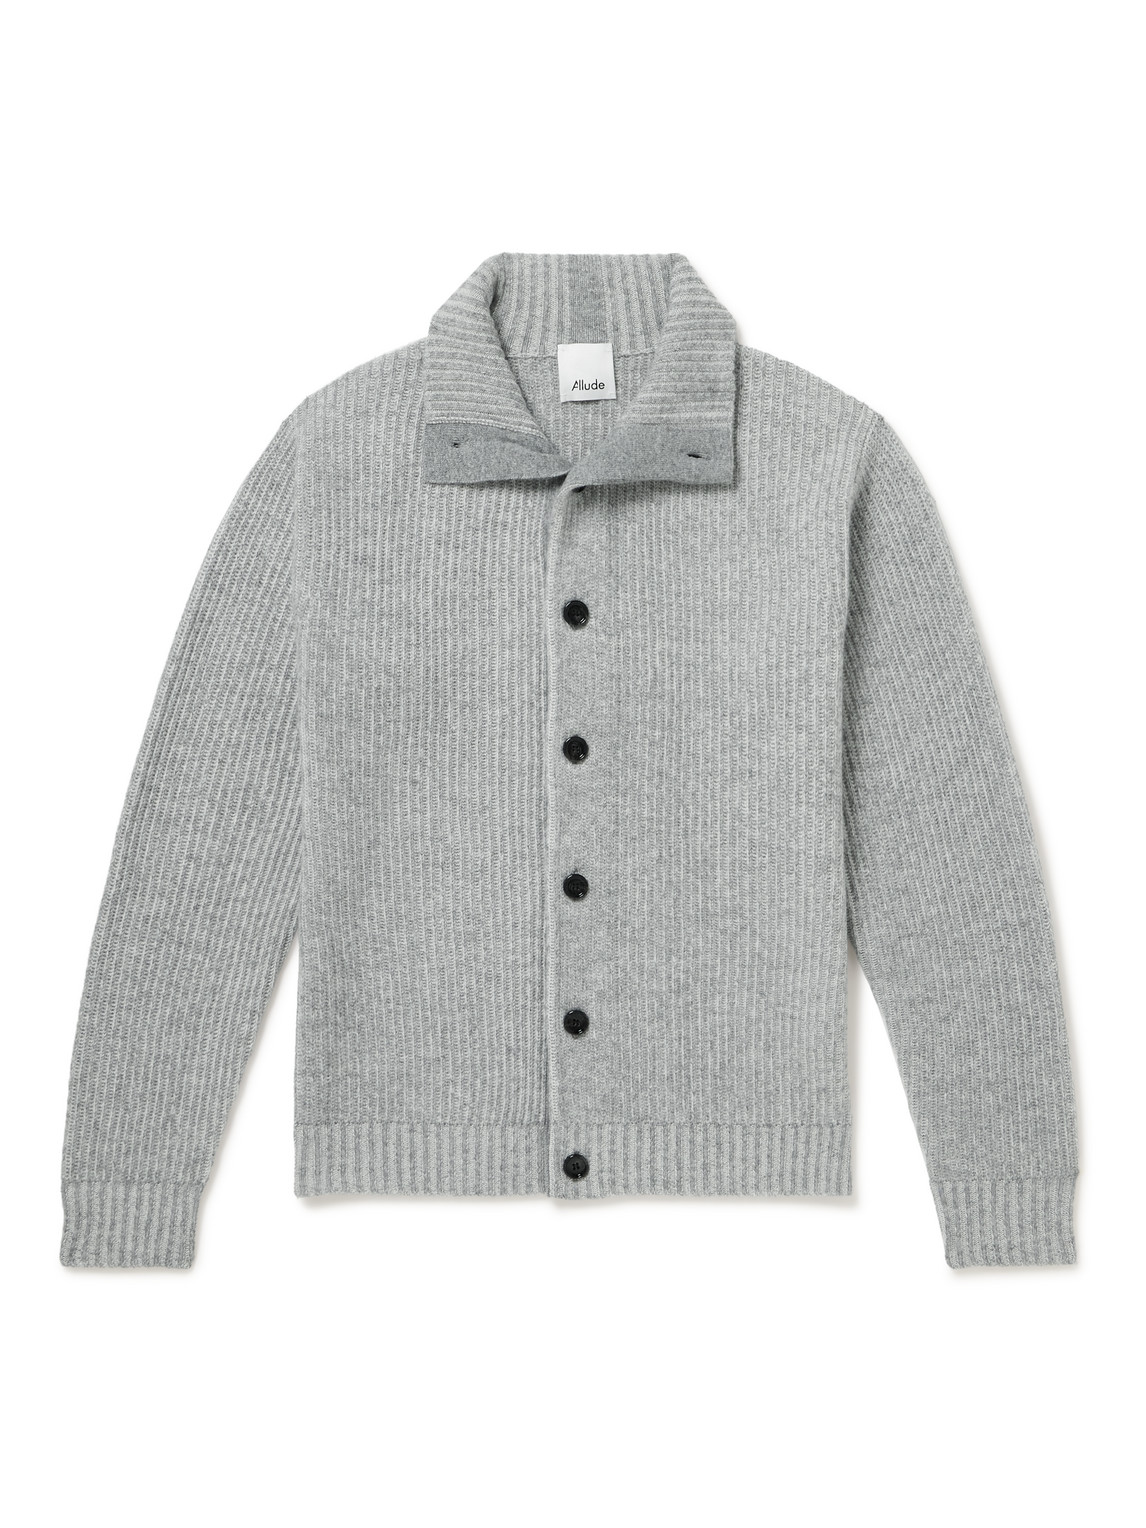 Allude Ribbed Cashmere Cardigan In Grey